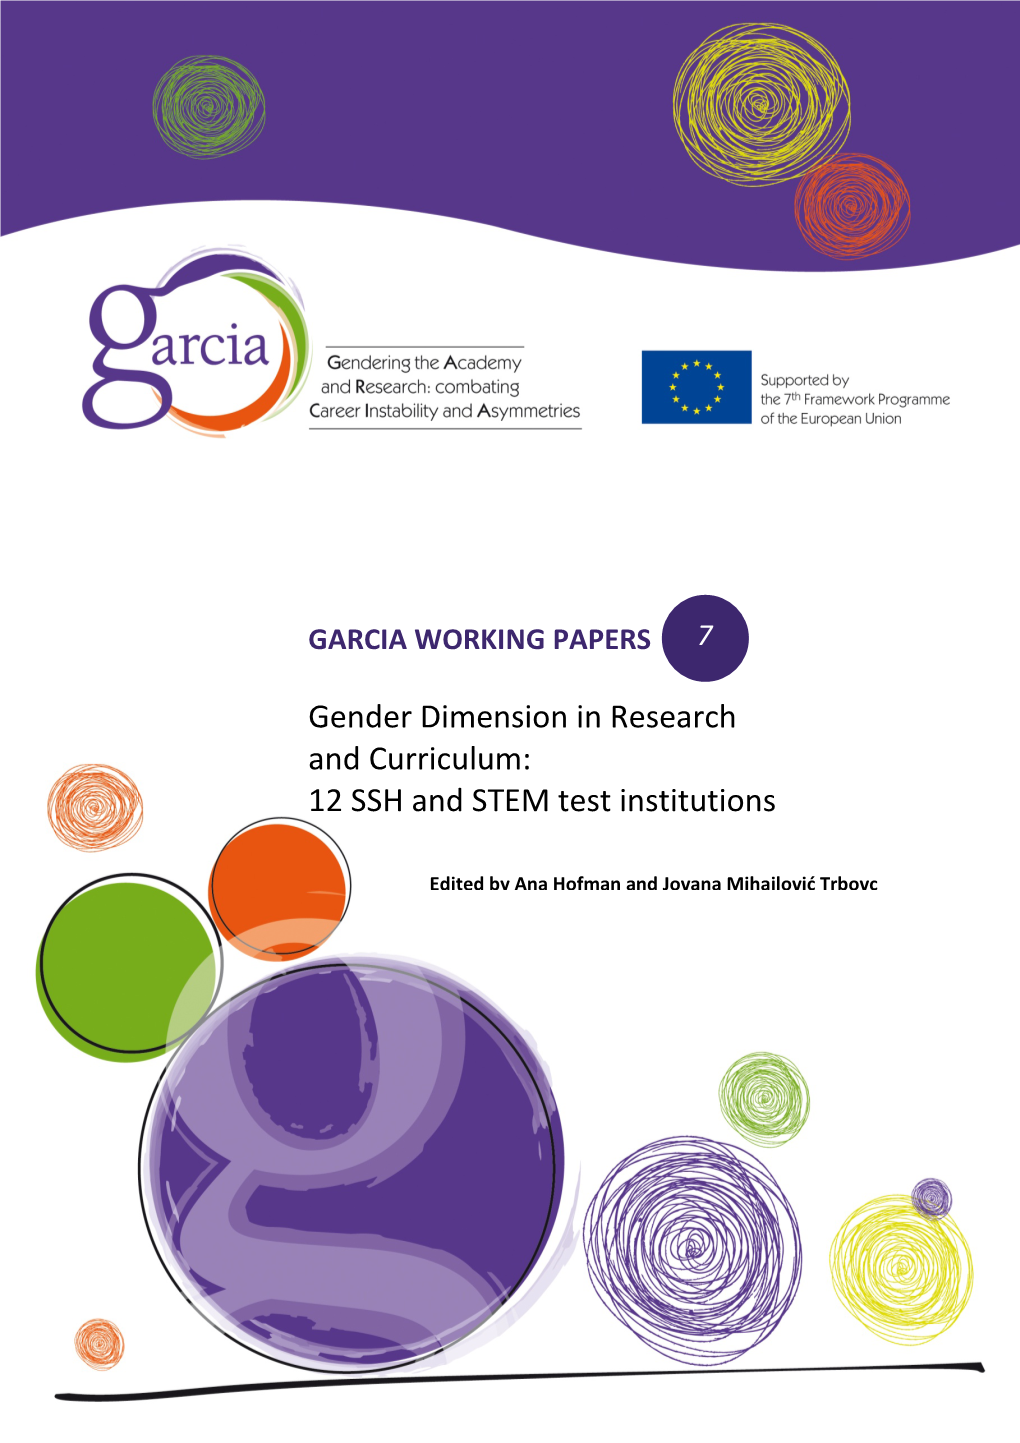 Gender Dimension in Research and Curriculum: 12 SSH and STEM Test Institutions